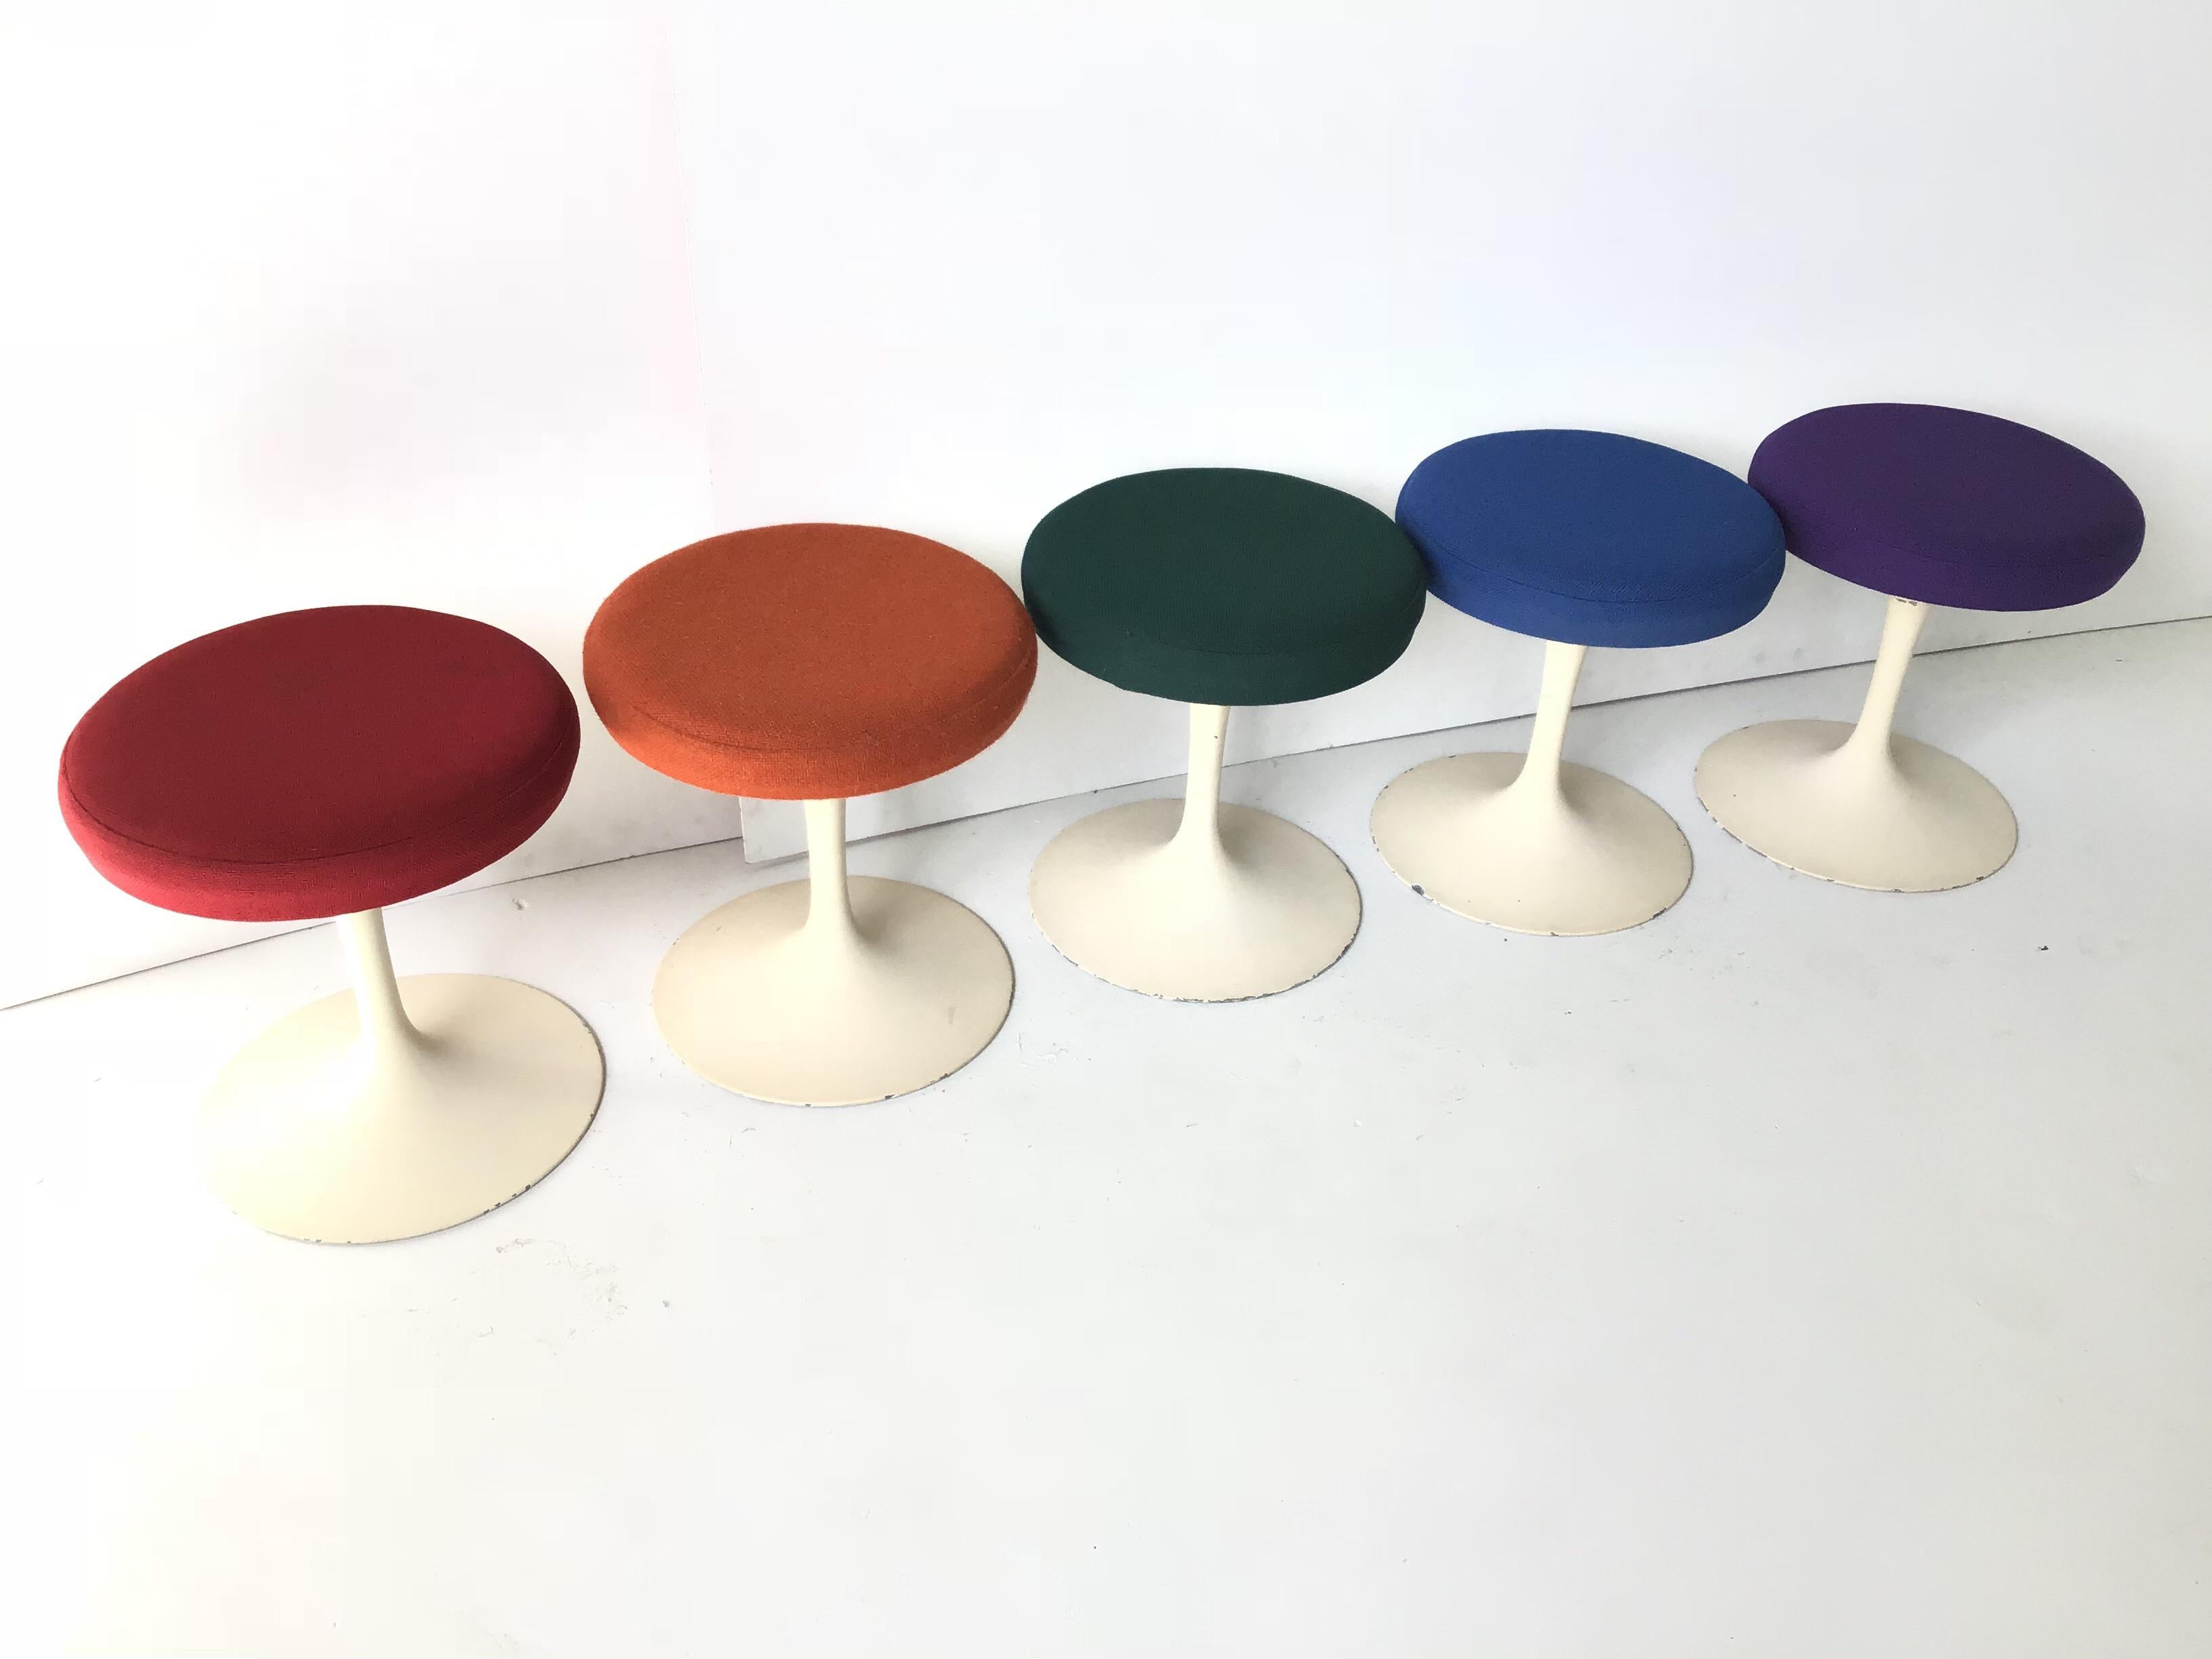 This is an amazing all original vintage set of Knoll tulip stools designed by Saarinen. They all retain their original fabric in five different colors pictured. The bases have not been repainted but are all original and show many knicks to paint.